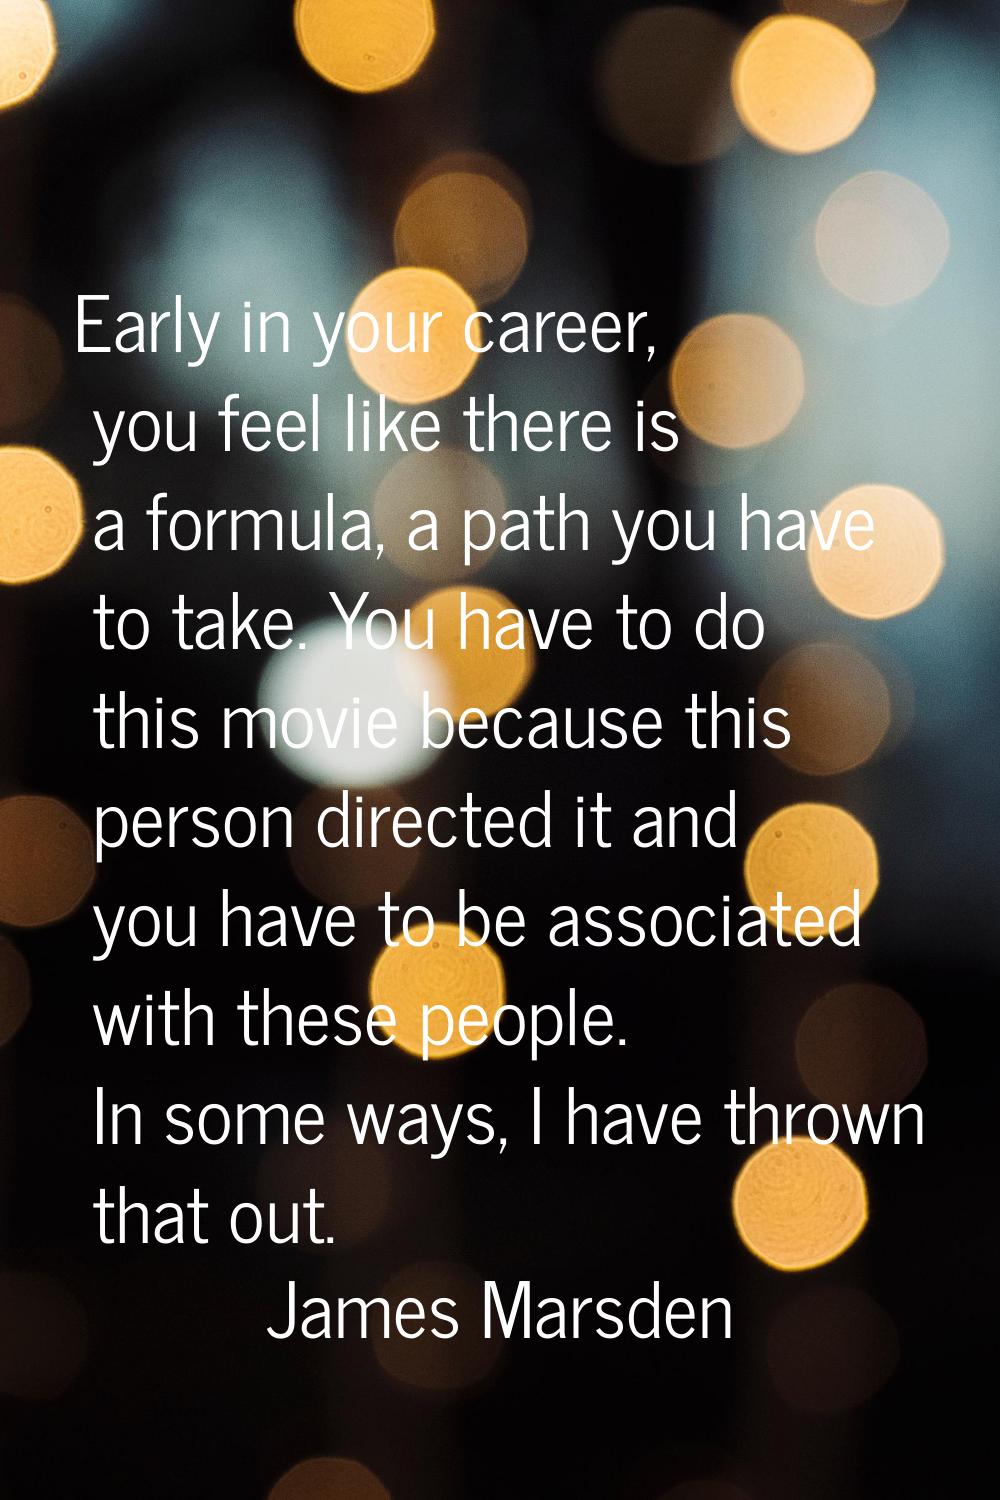 Early in your career, you feel like there is a formula, a path you have to take. You have to do thi